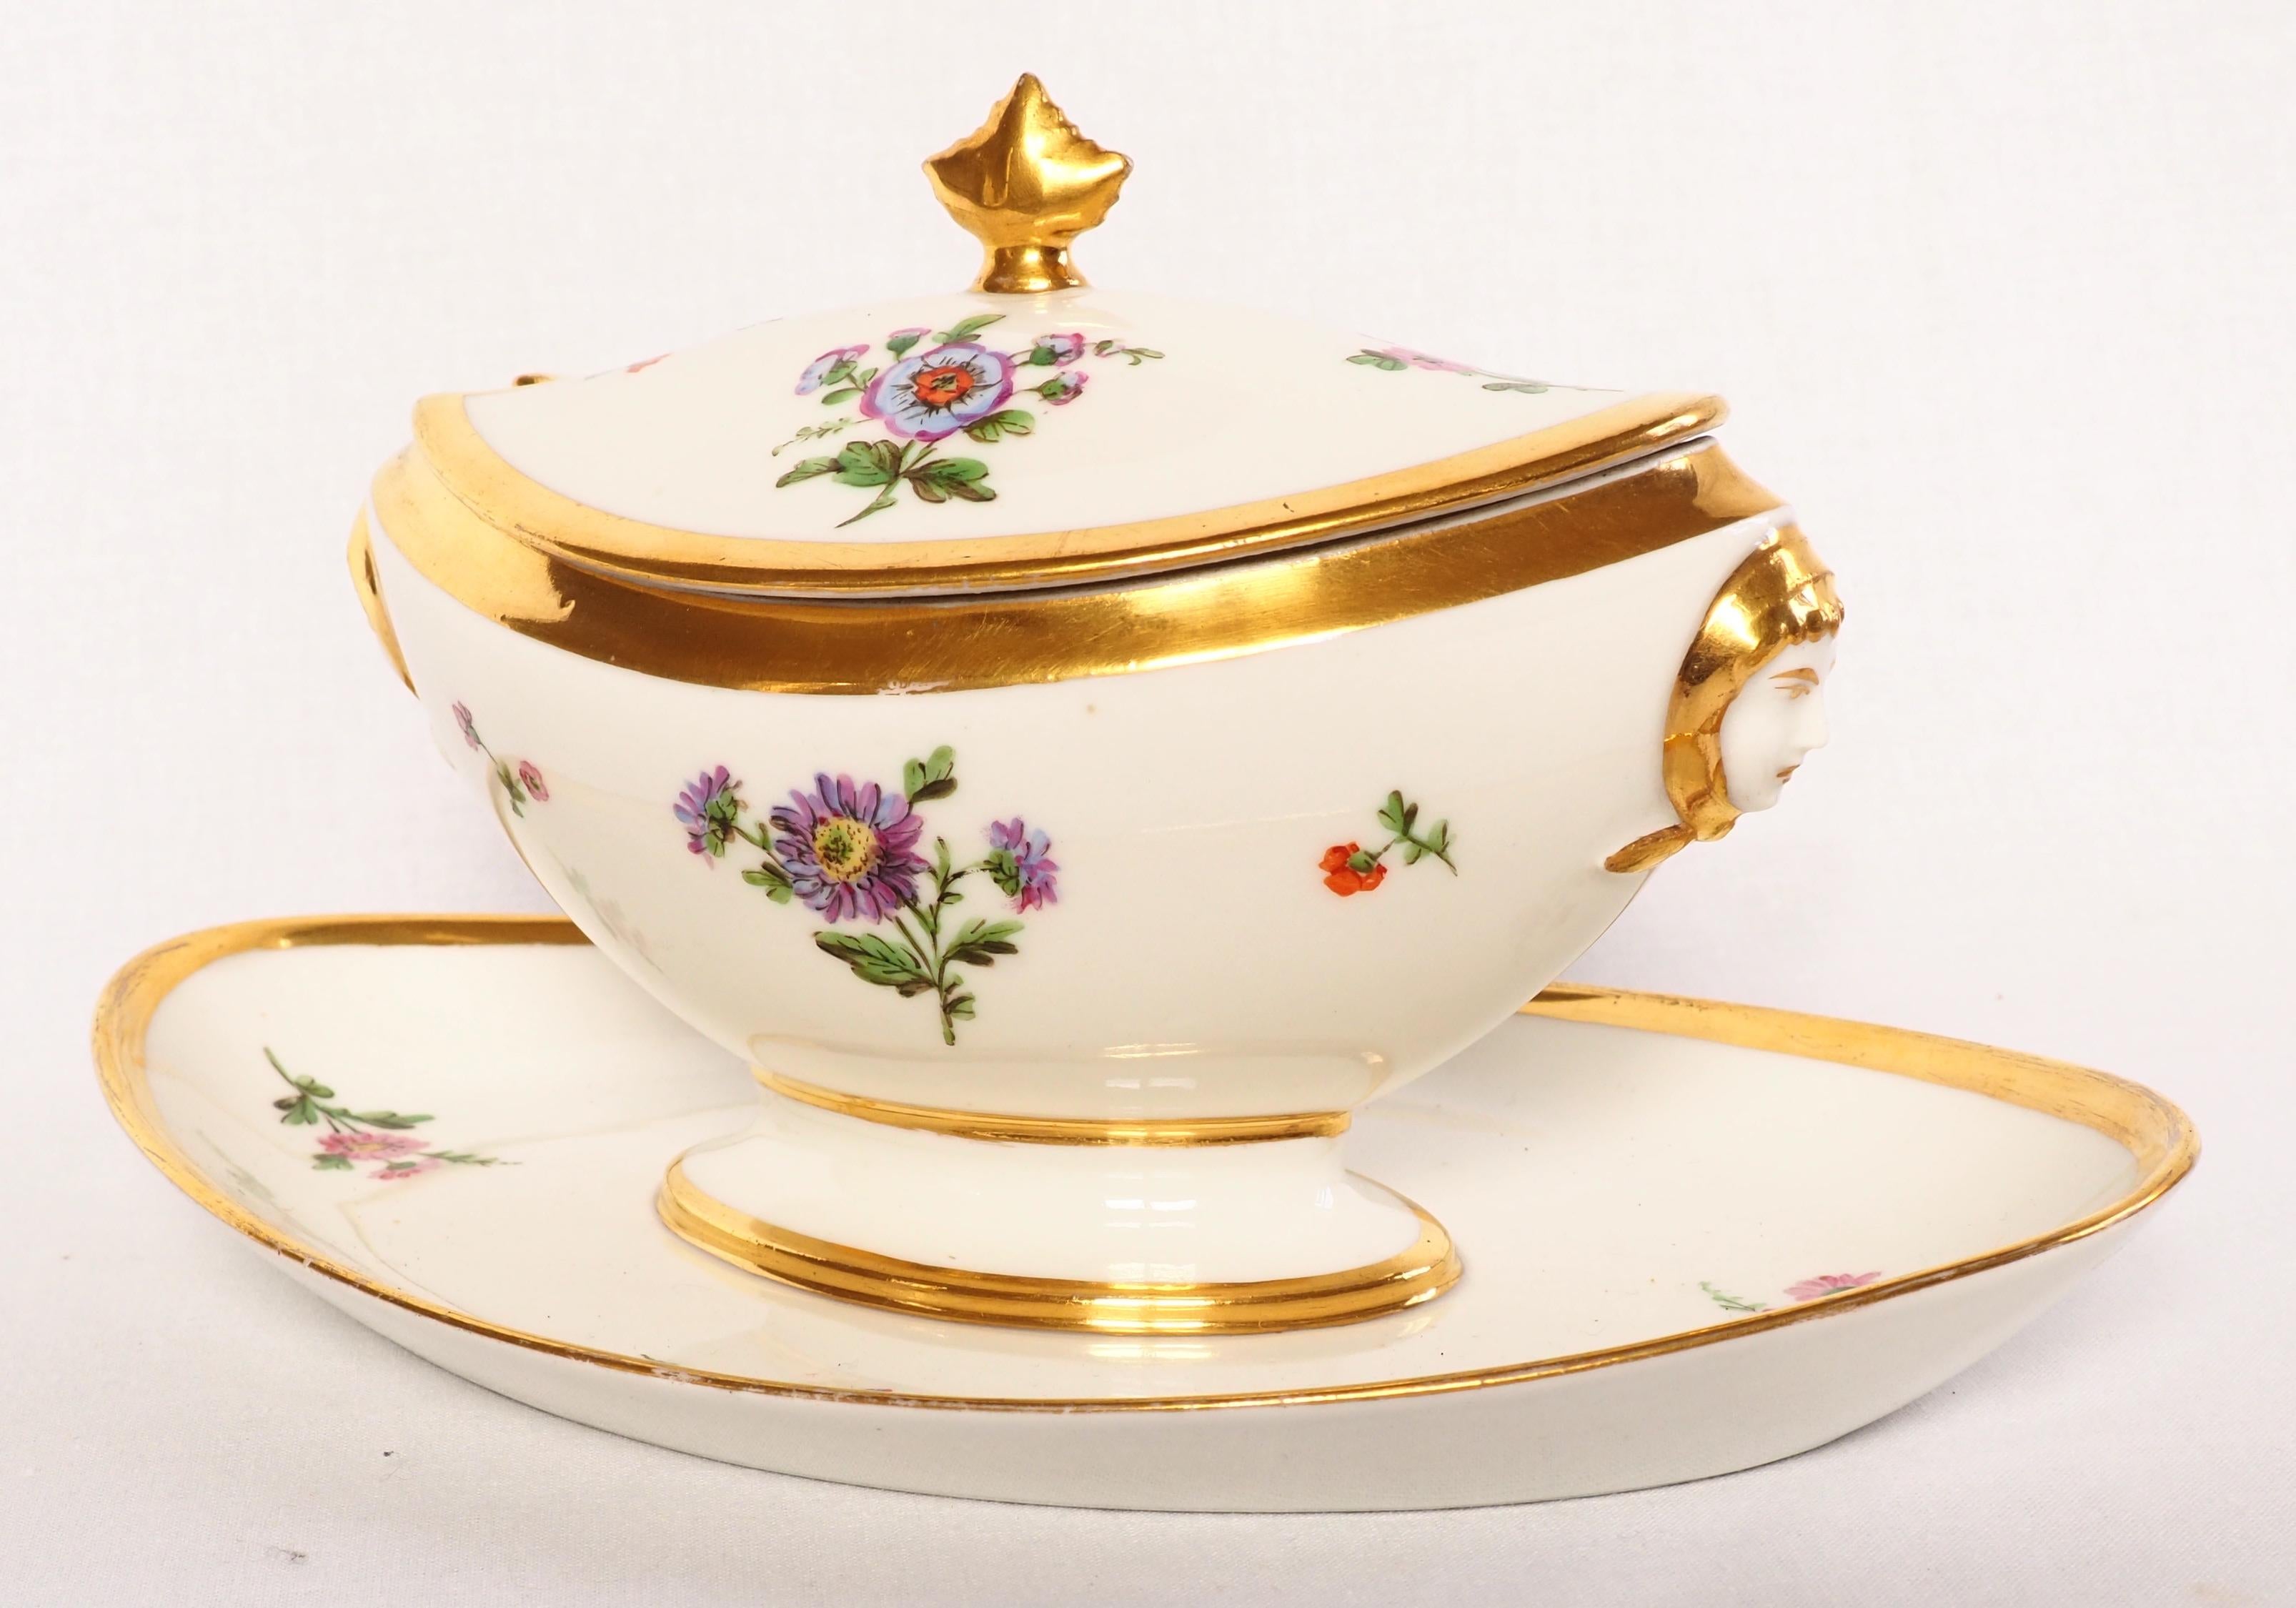 Early 19th Century Schoelcher Manufacture : Empire Paris porcelain sauce boat 19th century - signed